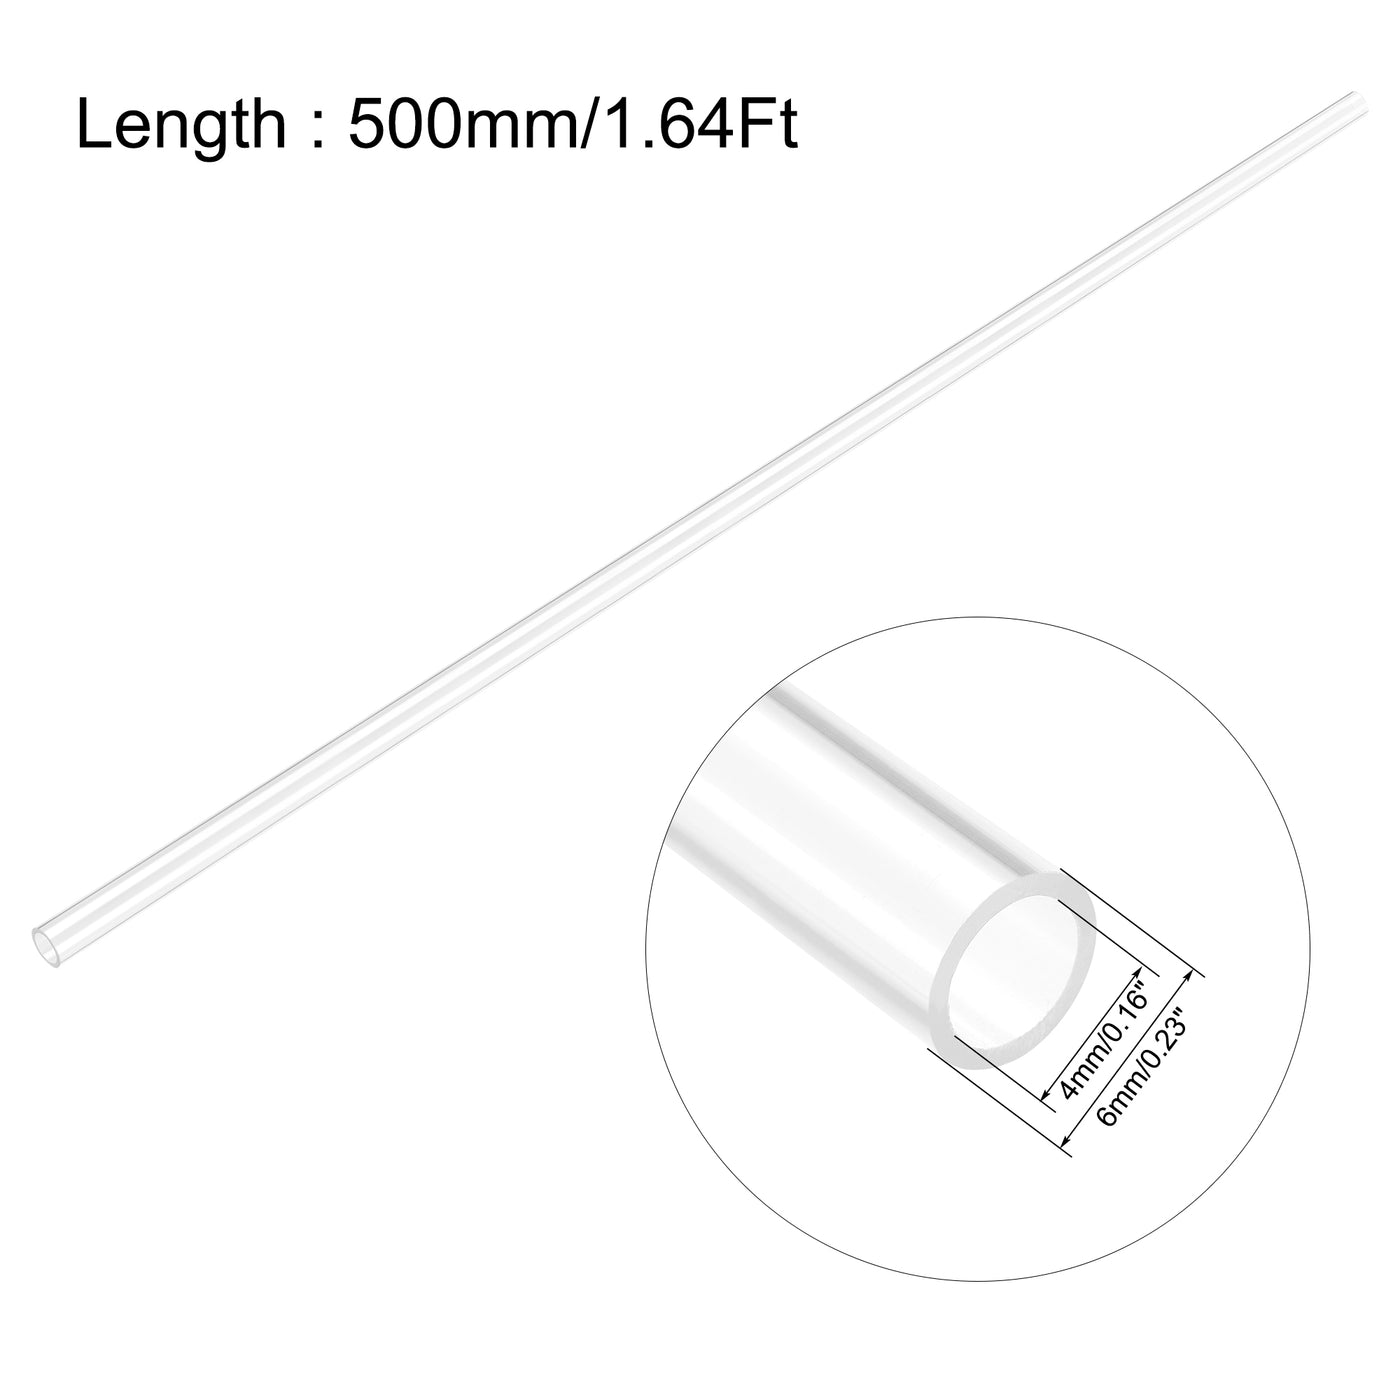 Uxcell Uxcell PC Rigid Round Clear Tubing 47mm(1.85 Inch)IDx50mm(1.97 Inch)ODx500mm(1.64Ft) Length Plastic Tube